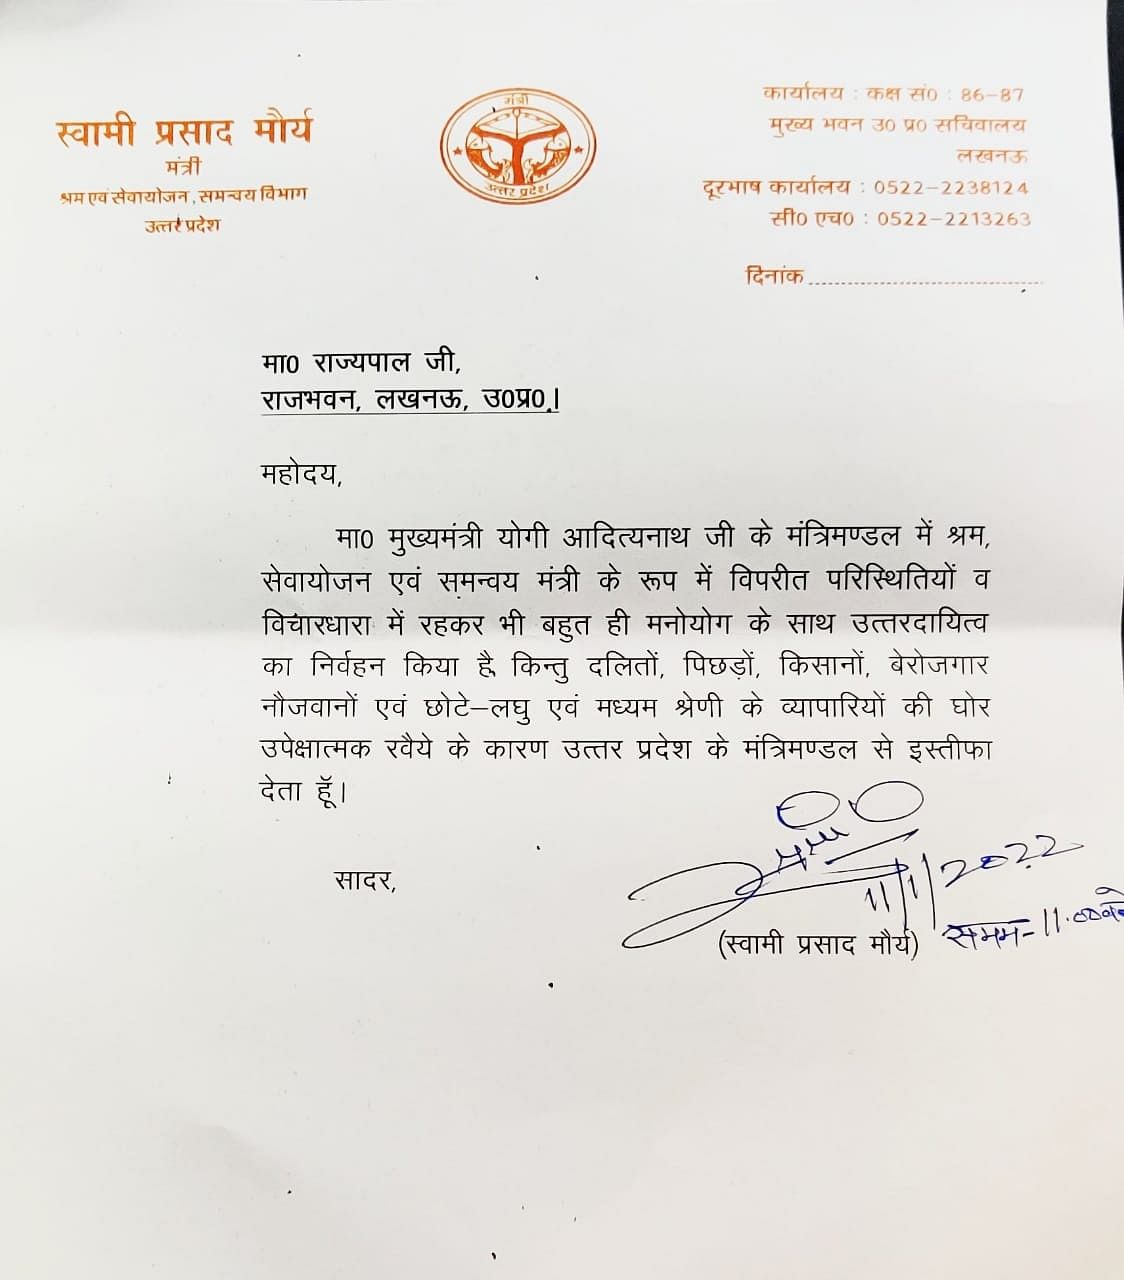 After Maurya, BJP MLA Brijesh Kumar Prajapati also resigned from the primary membership of the party.